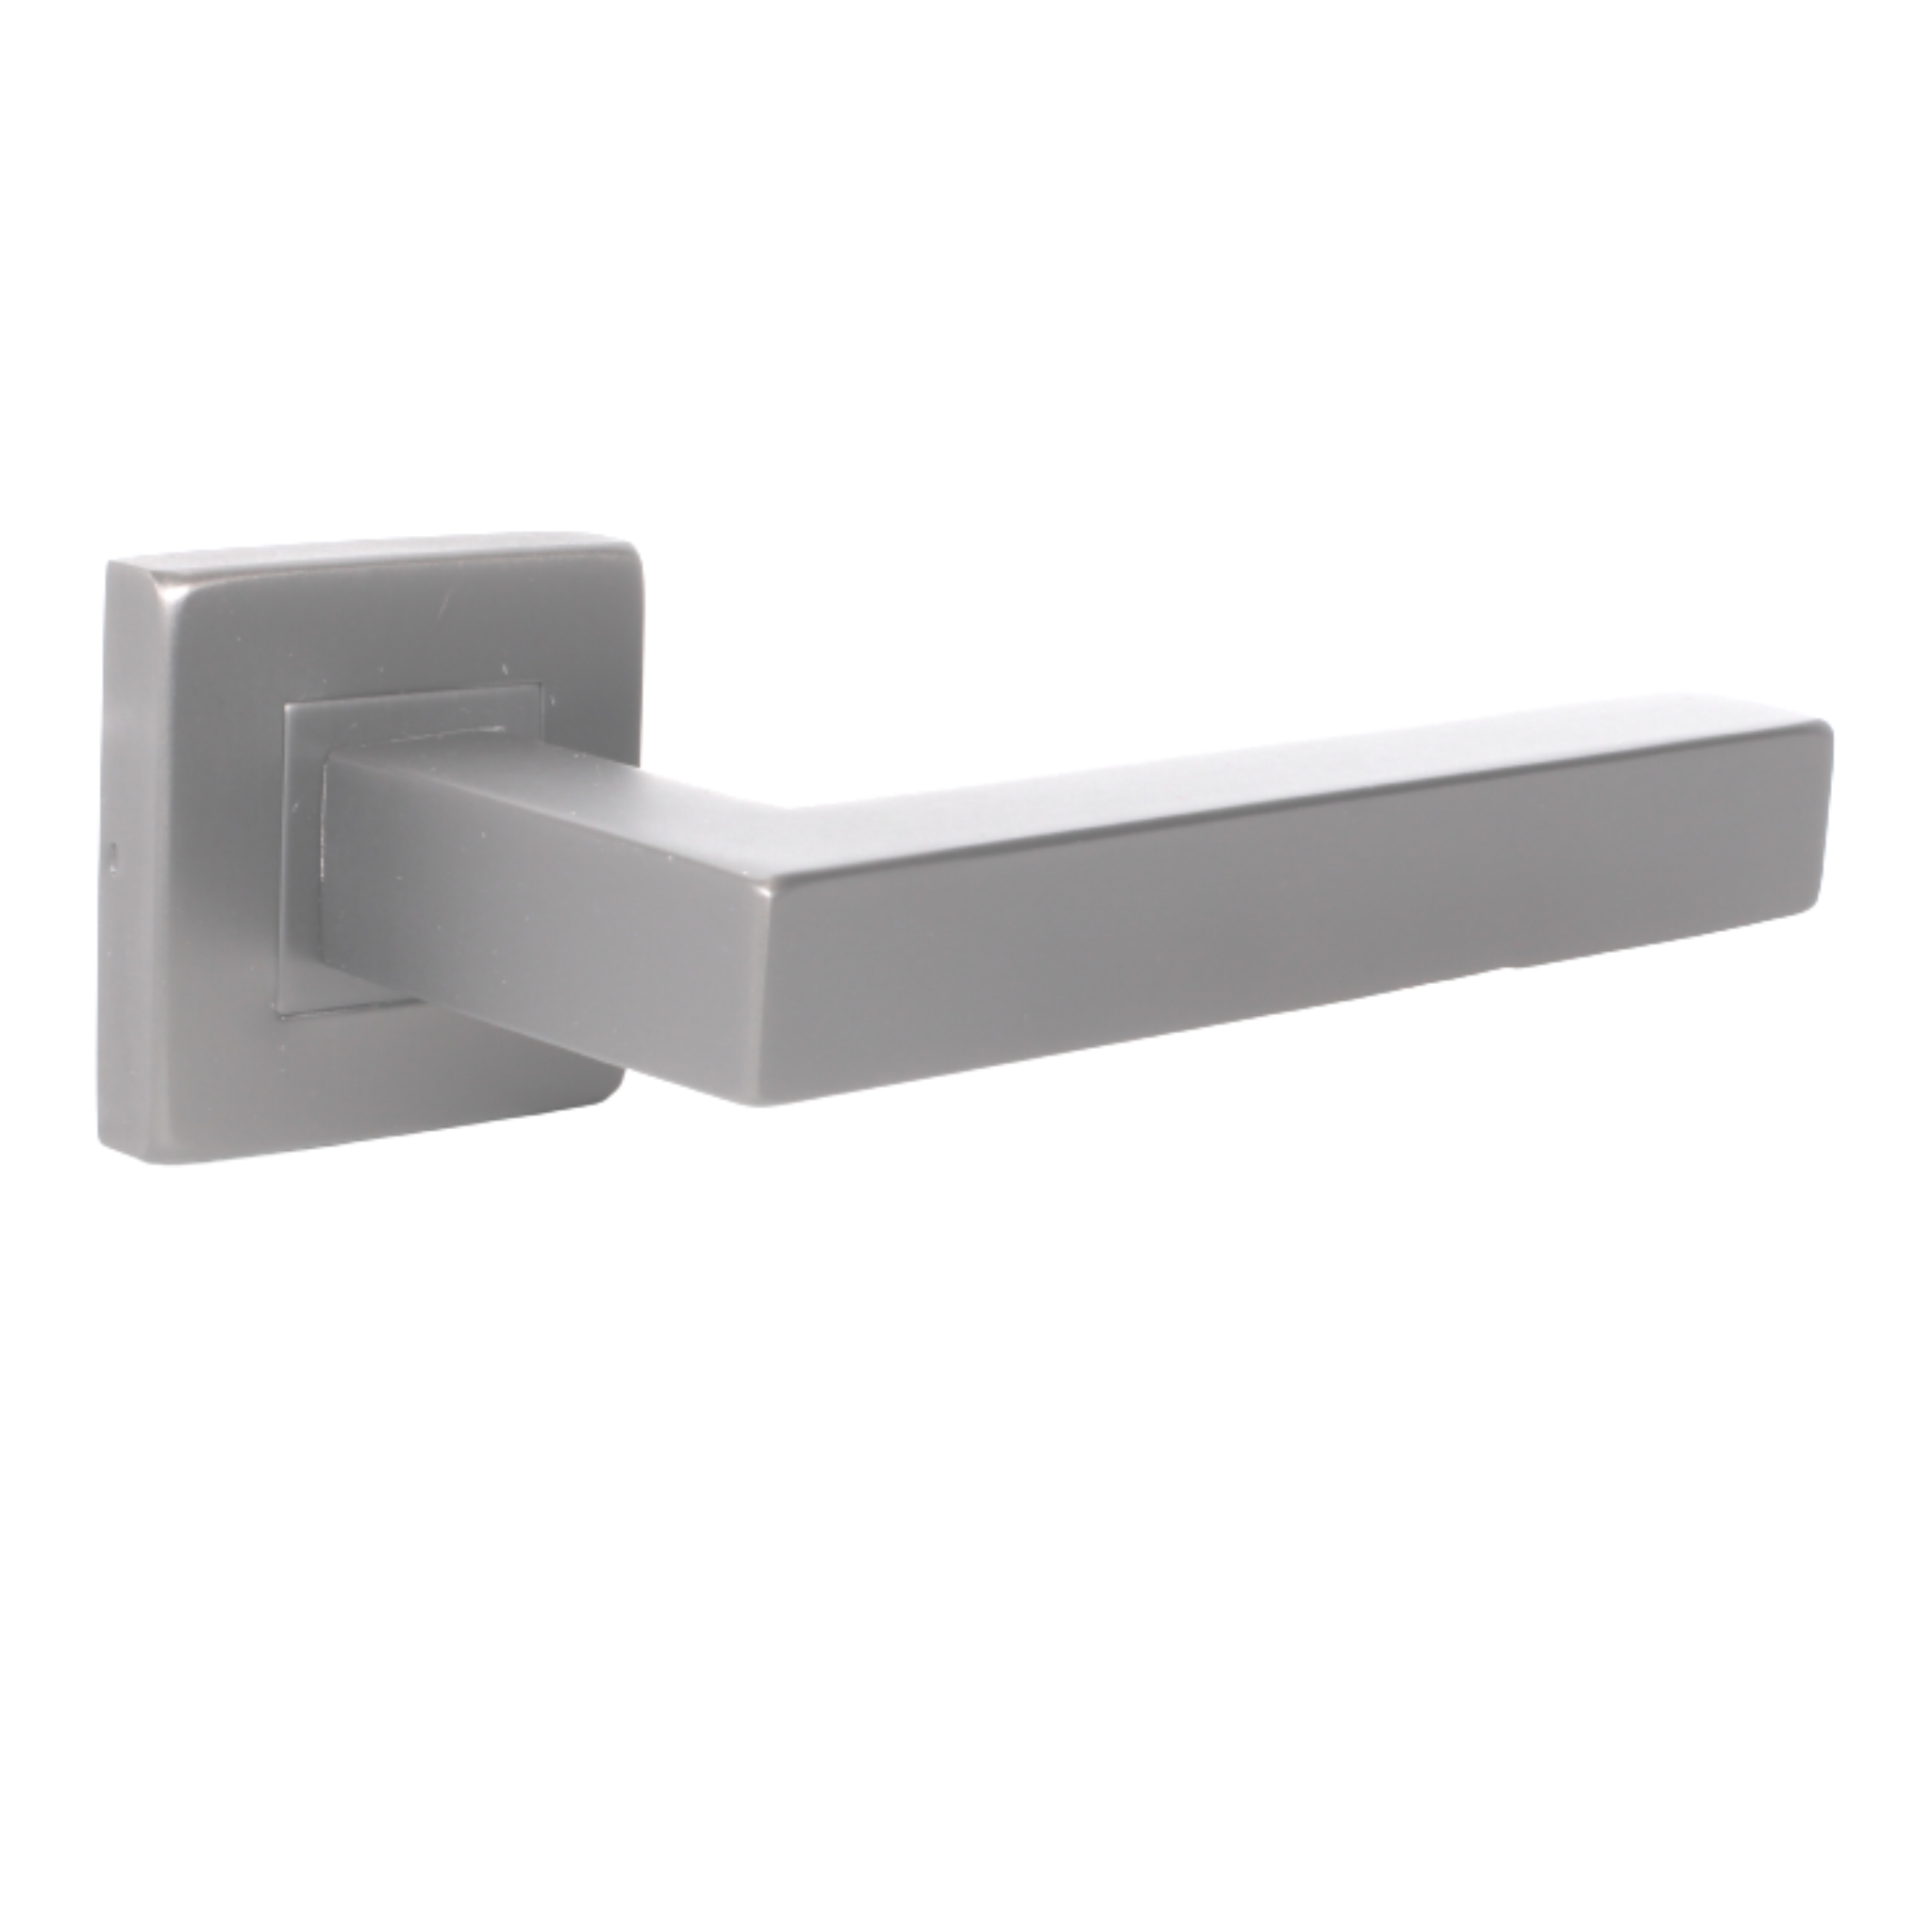 FS201.S._.SS, Lever Handles, Form, On Square Rose, With Escutcheons, Stainless Steel, CISA